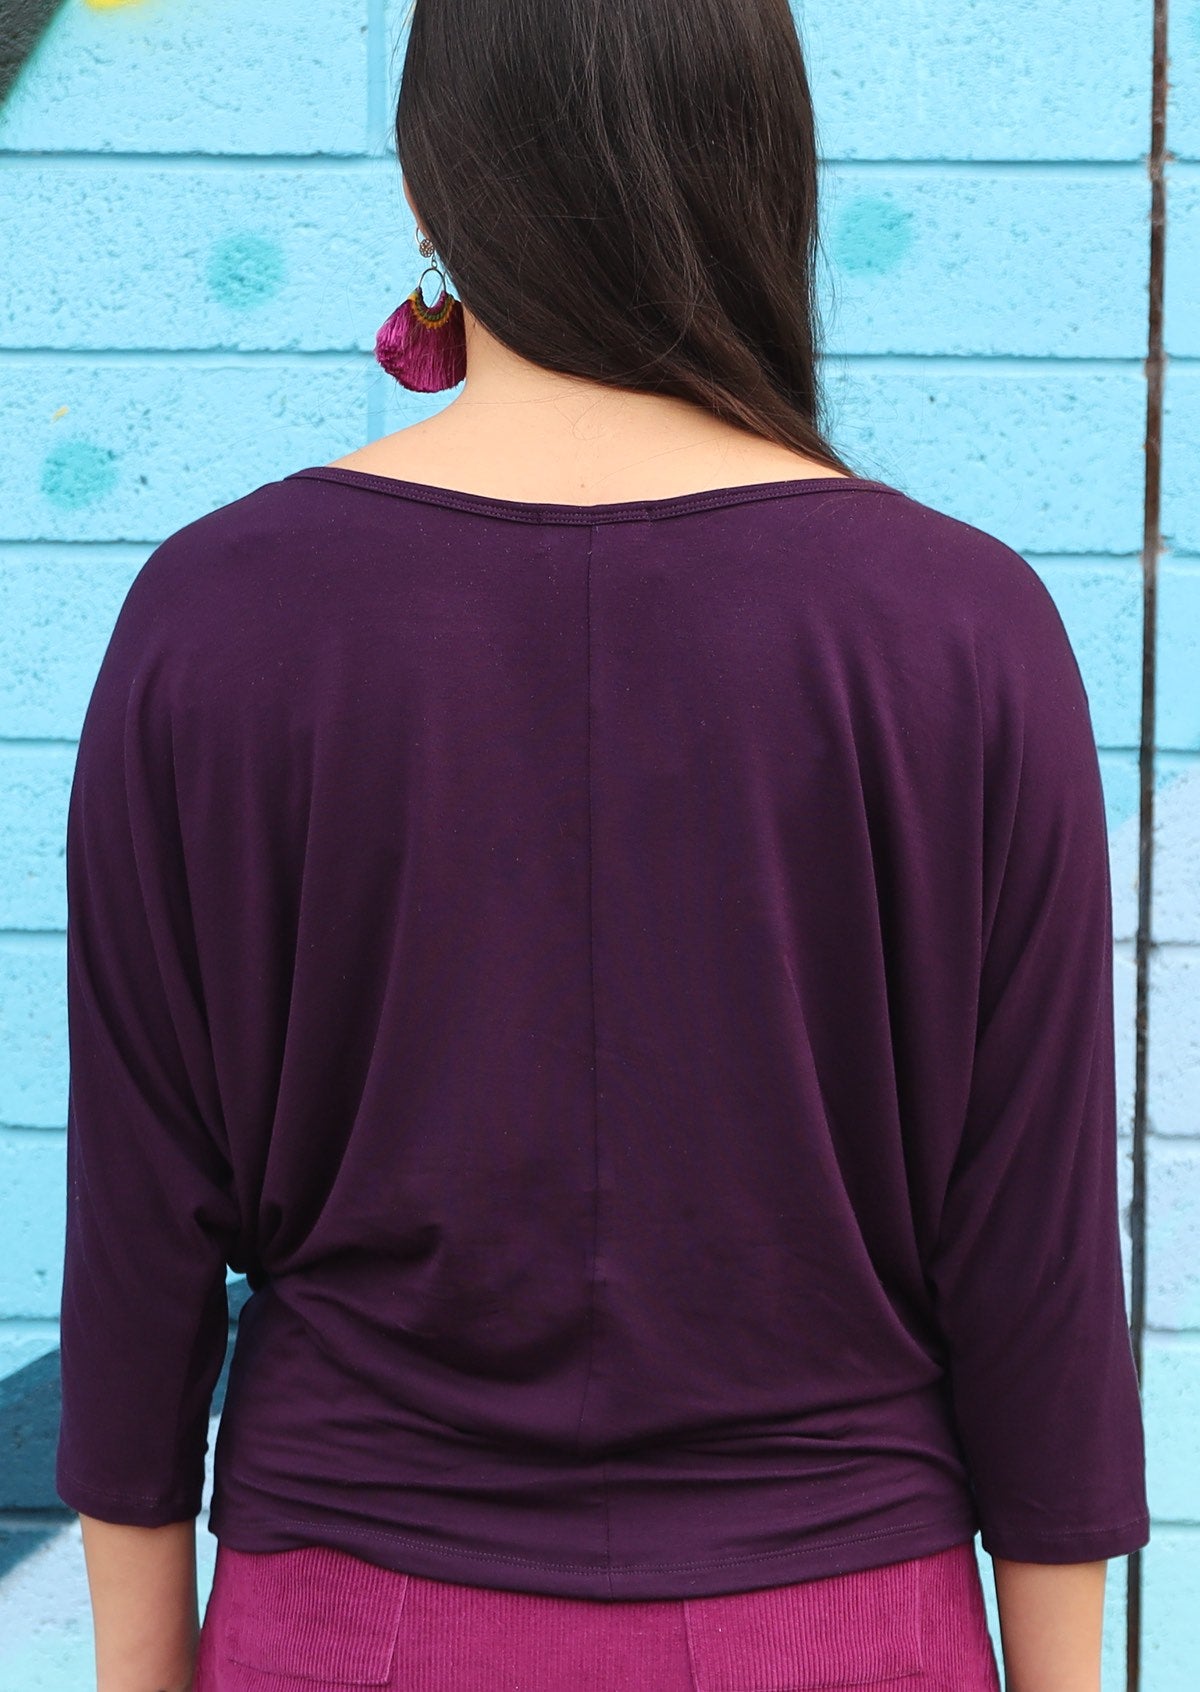 Back view of woman wearing a 3/4 sleeve rayon batwing round neckline purple top.